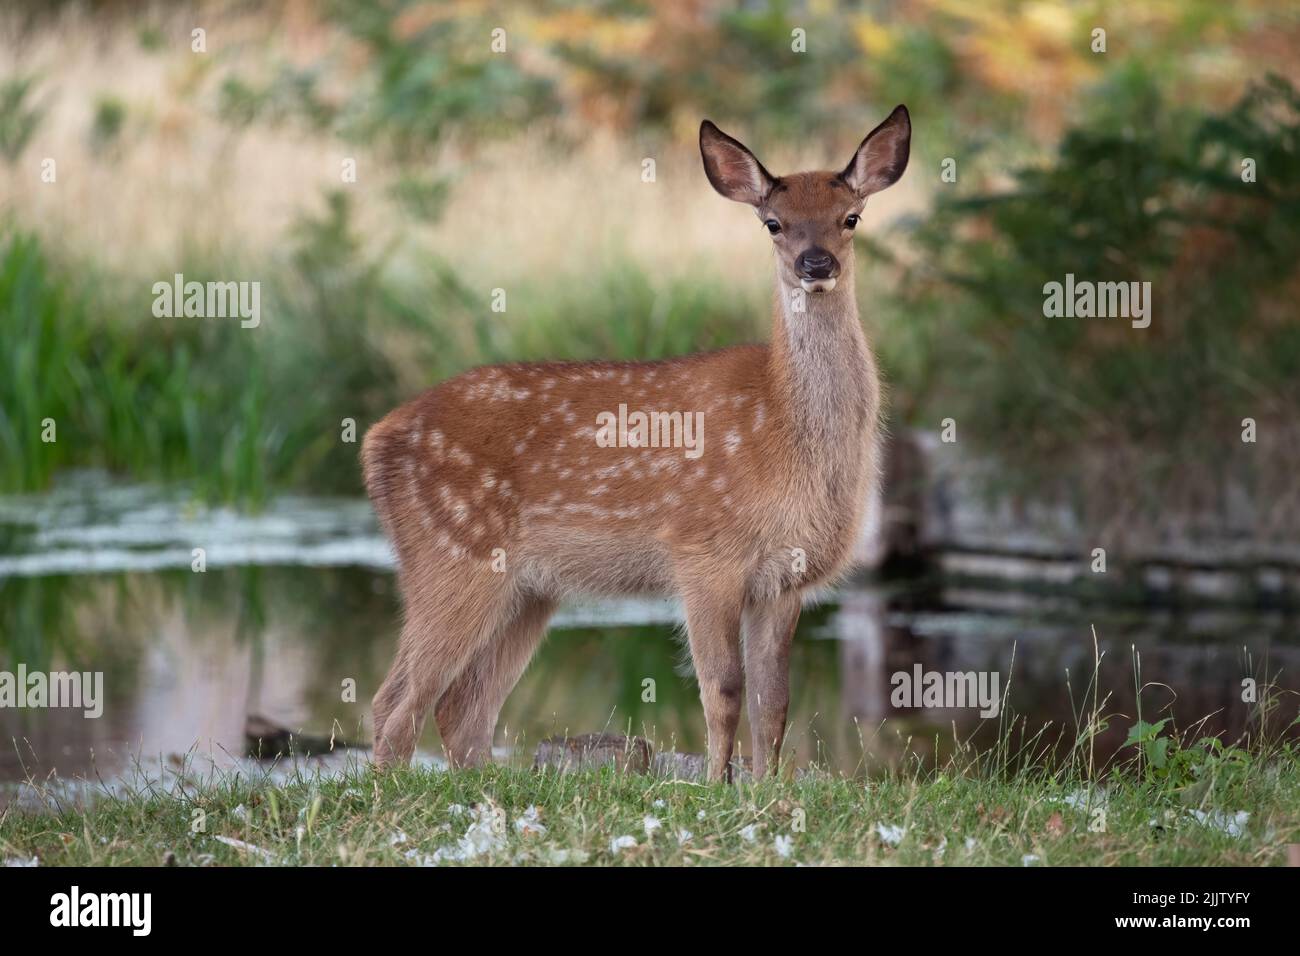 Fallow deer with distinctive white spots and long eye lashses Stock Photo